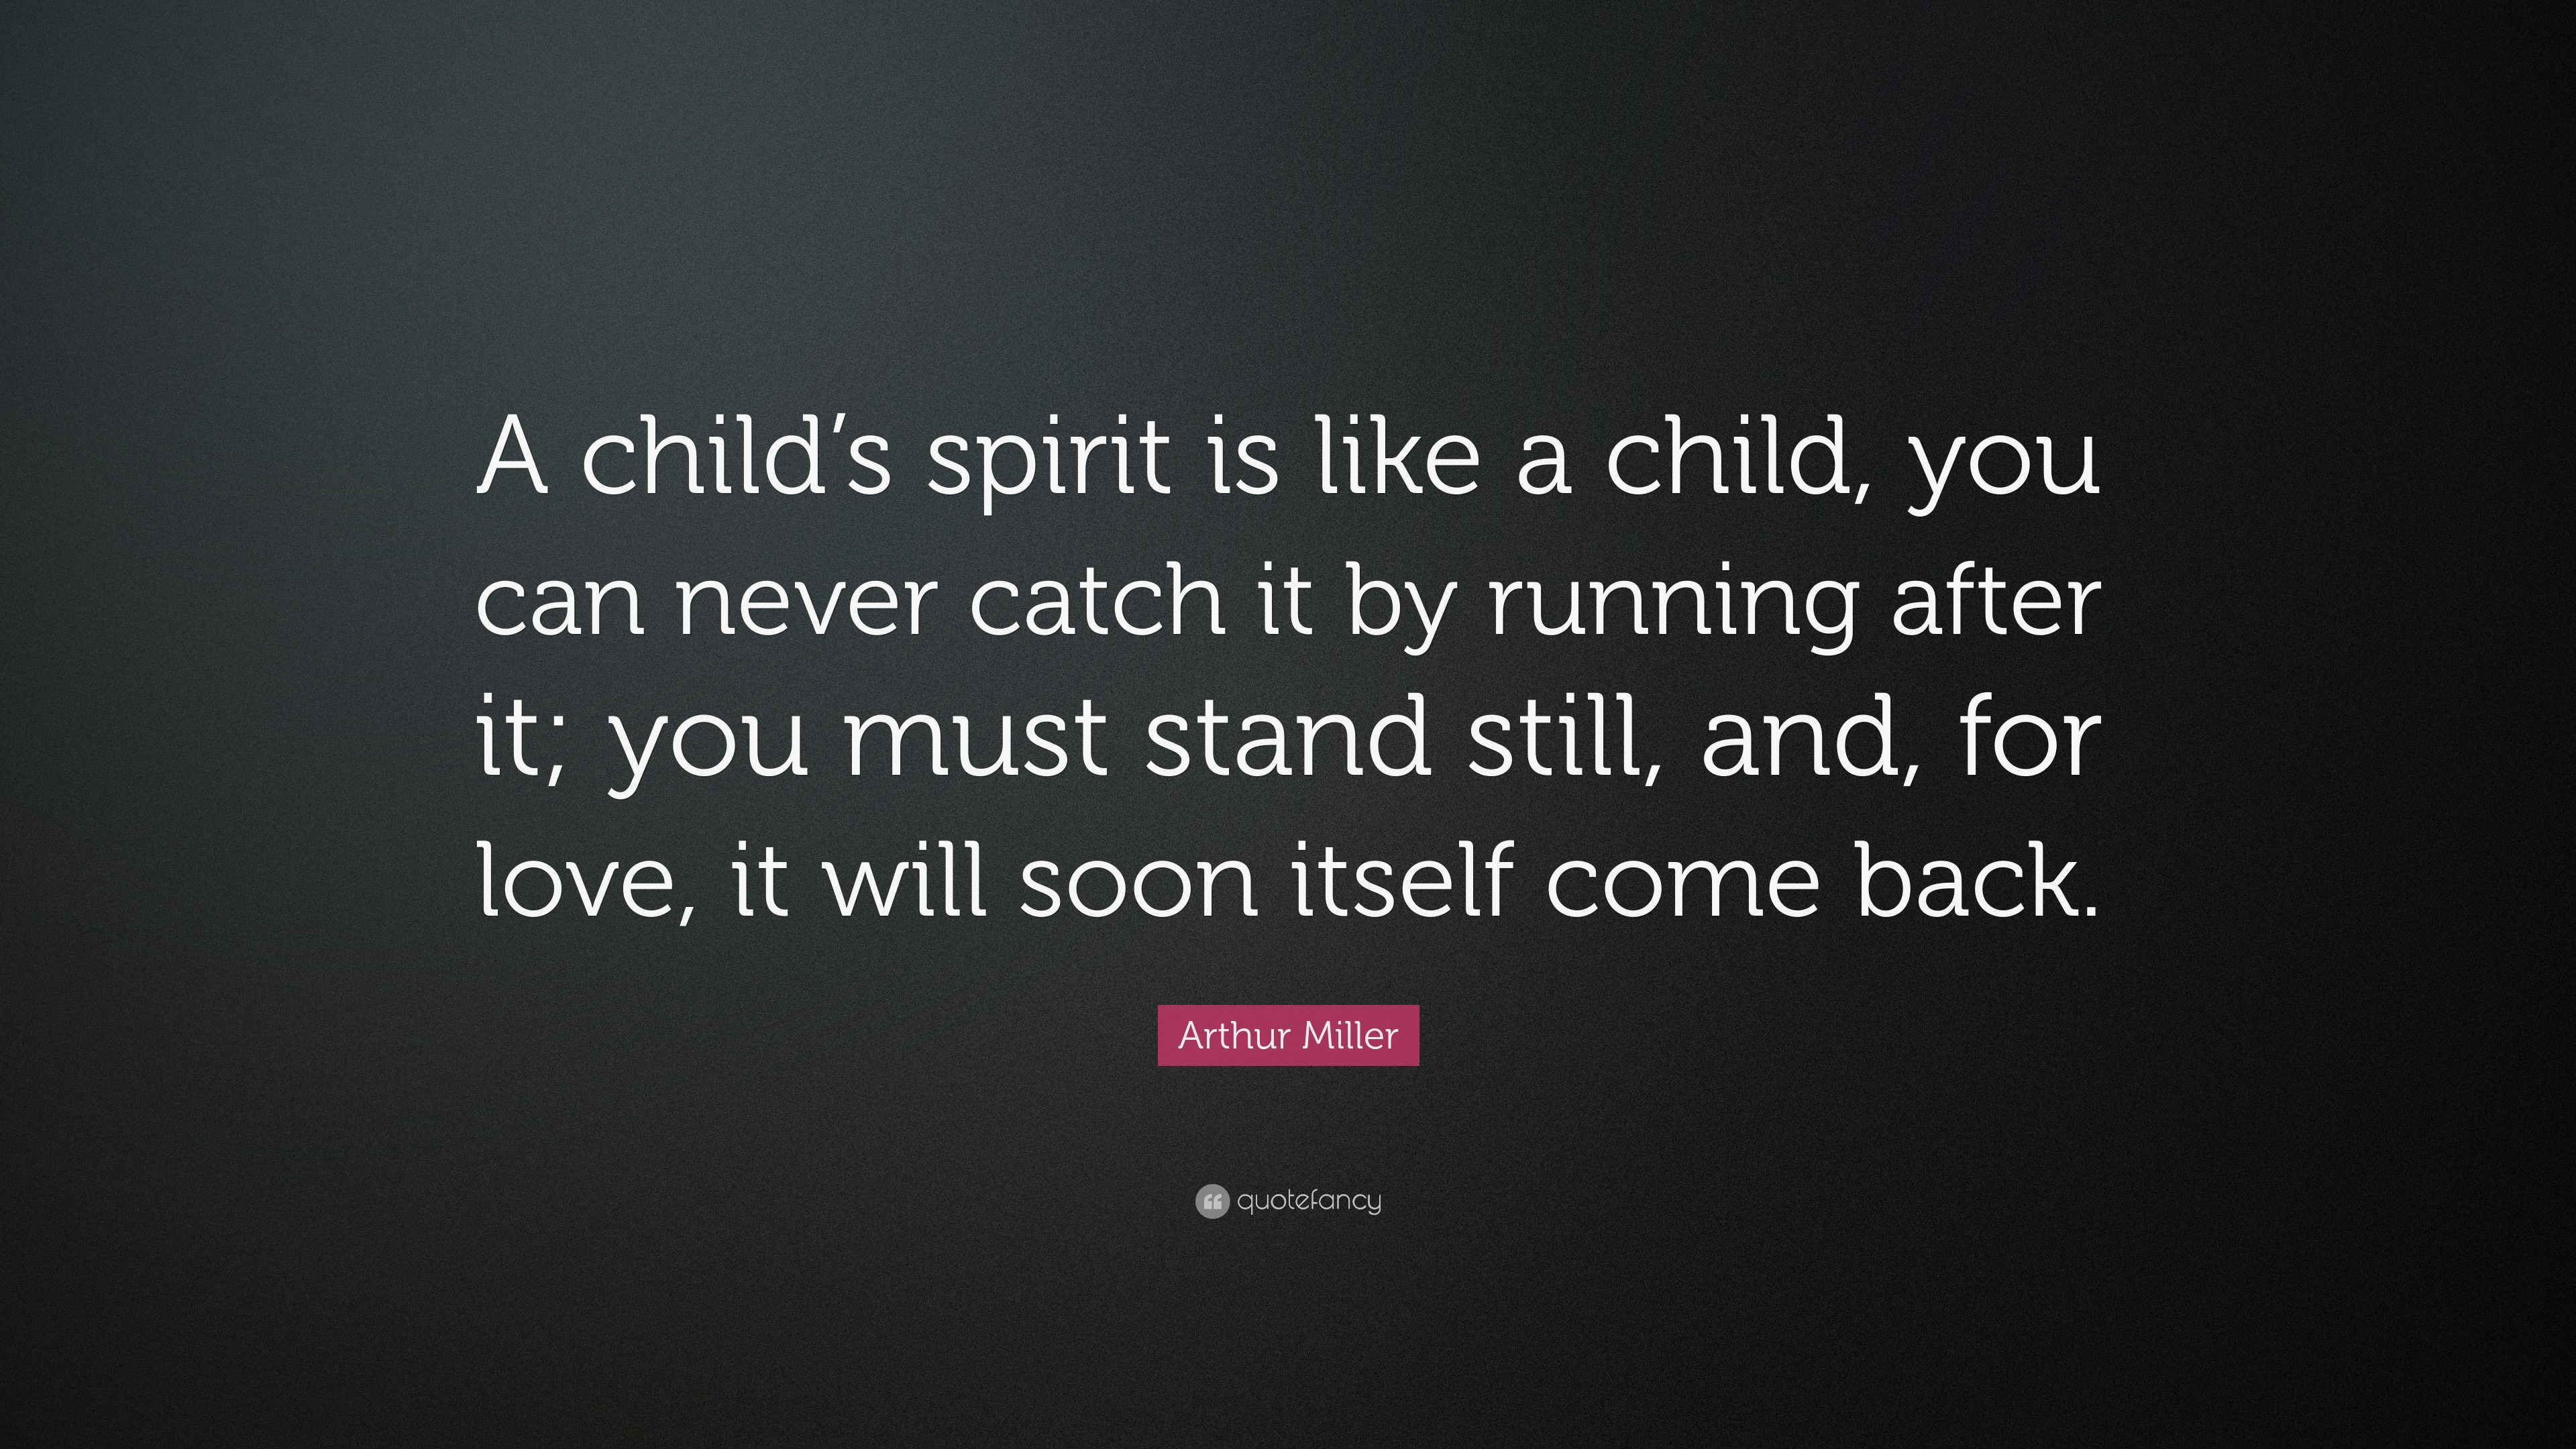 Arthur Miller Quote “A child s spirit is like a child you can never